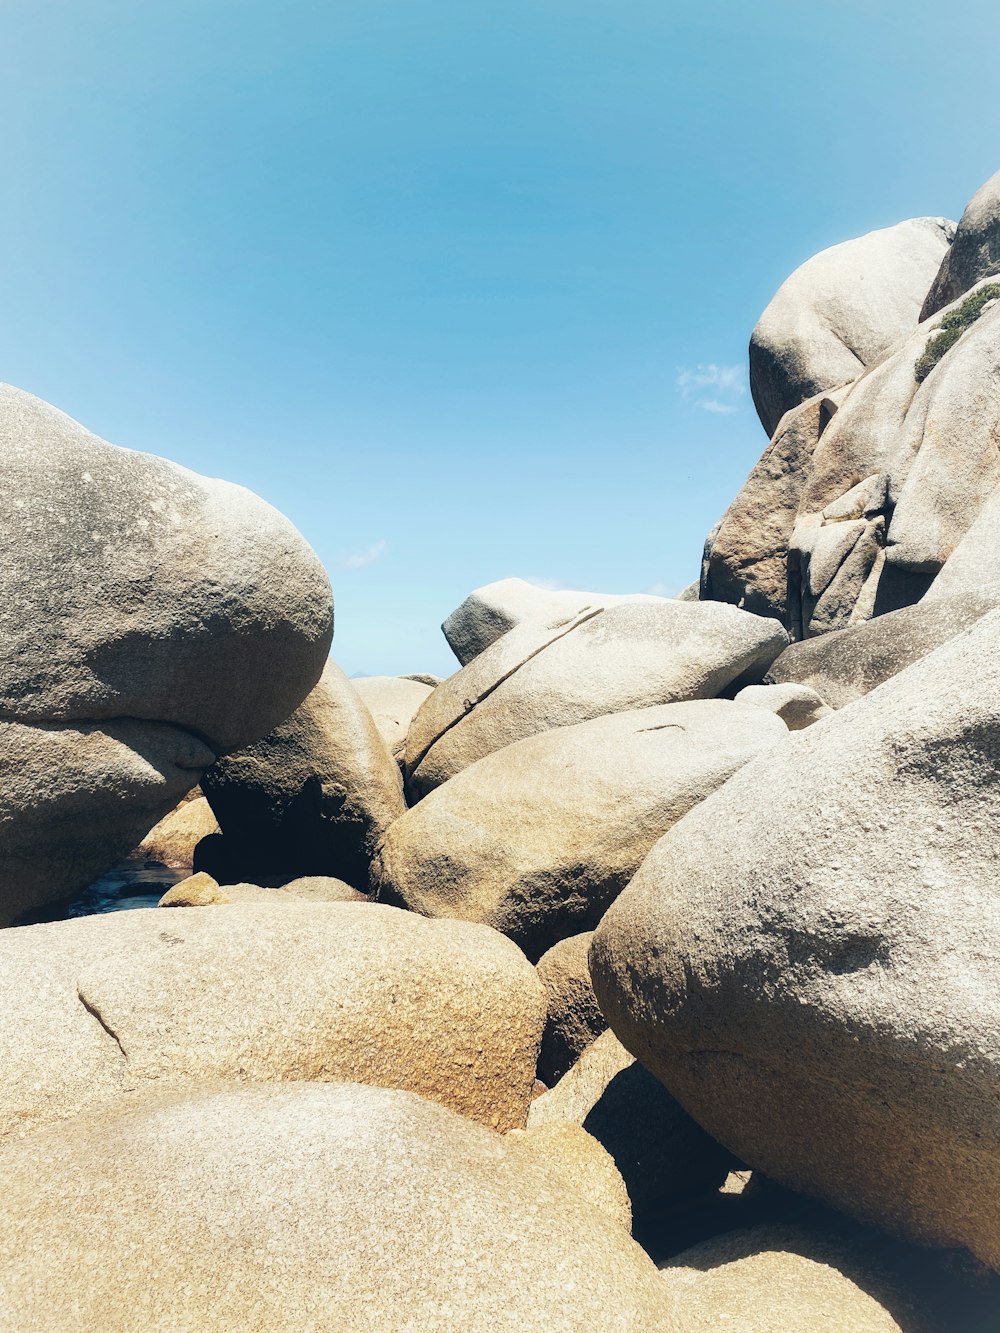 a rocky beach with large rocks and a clear blue sky